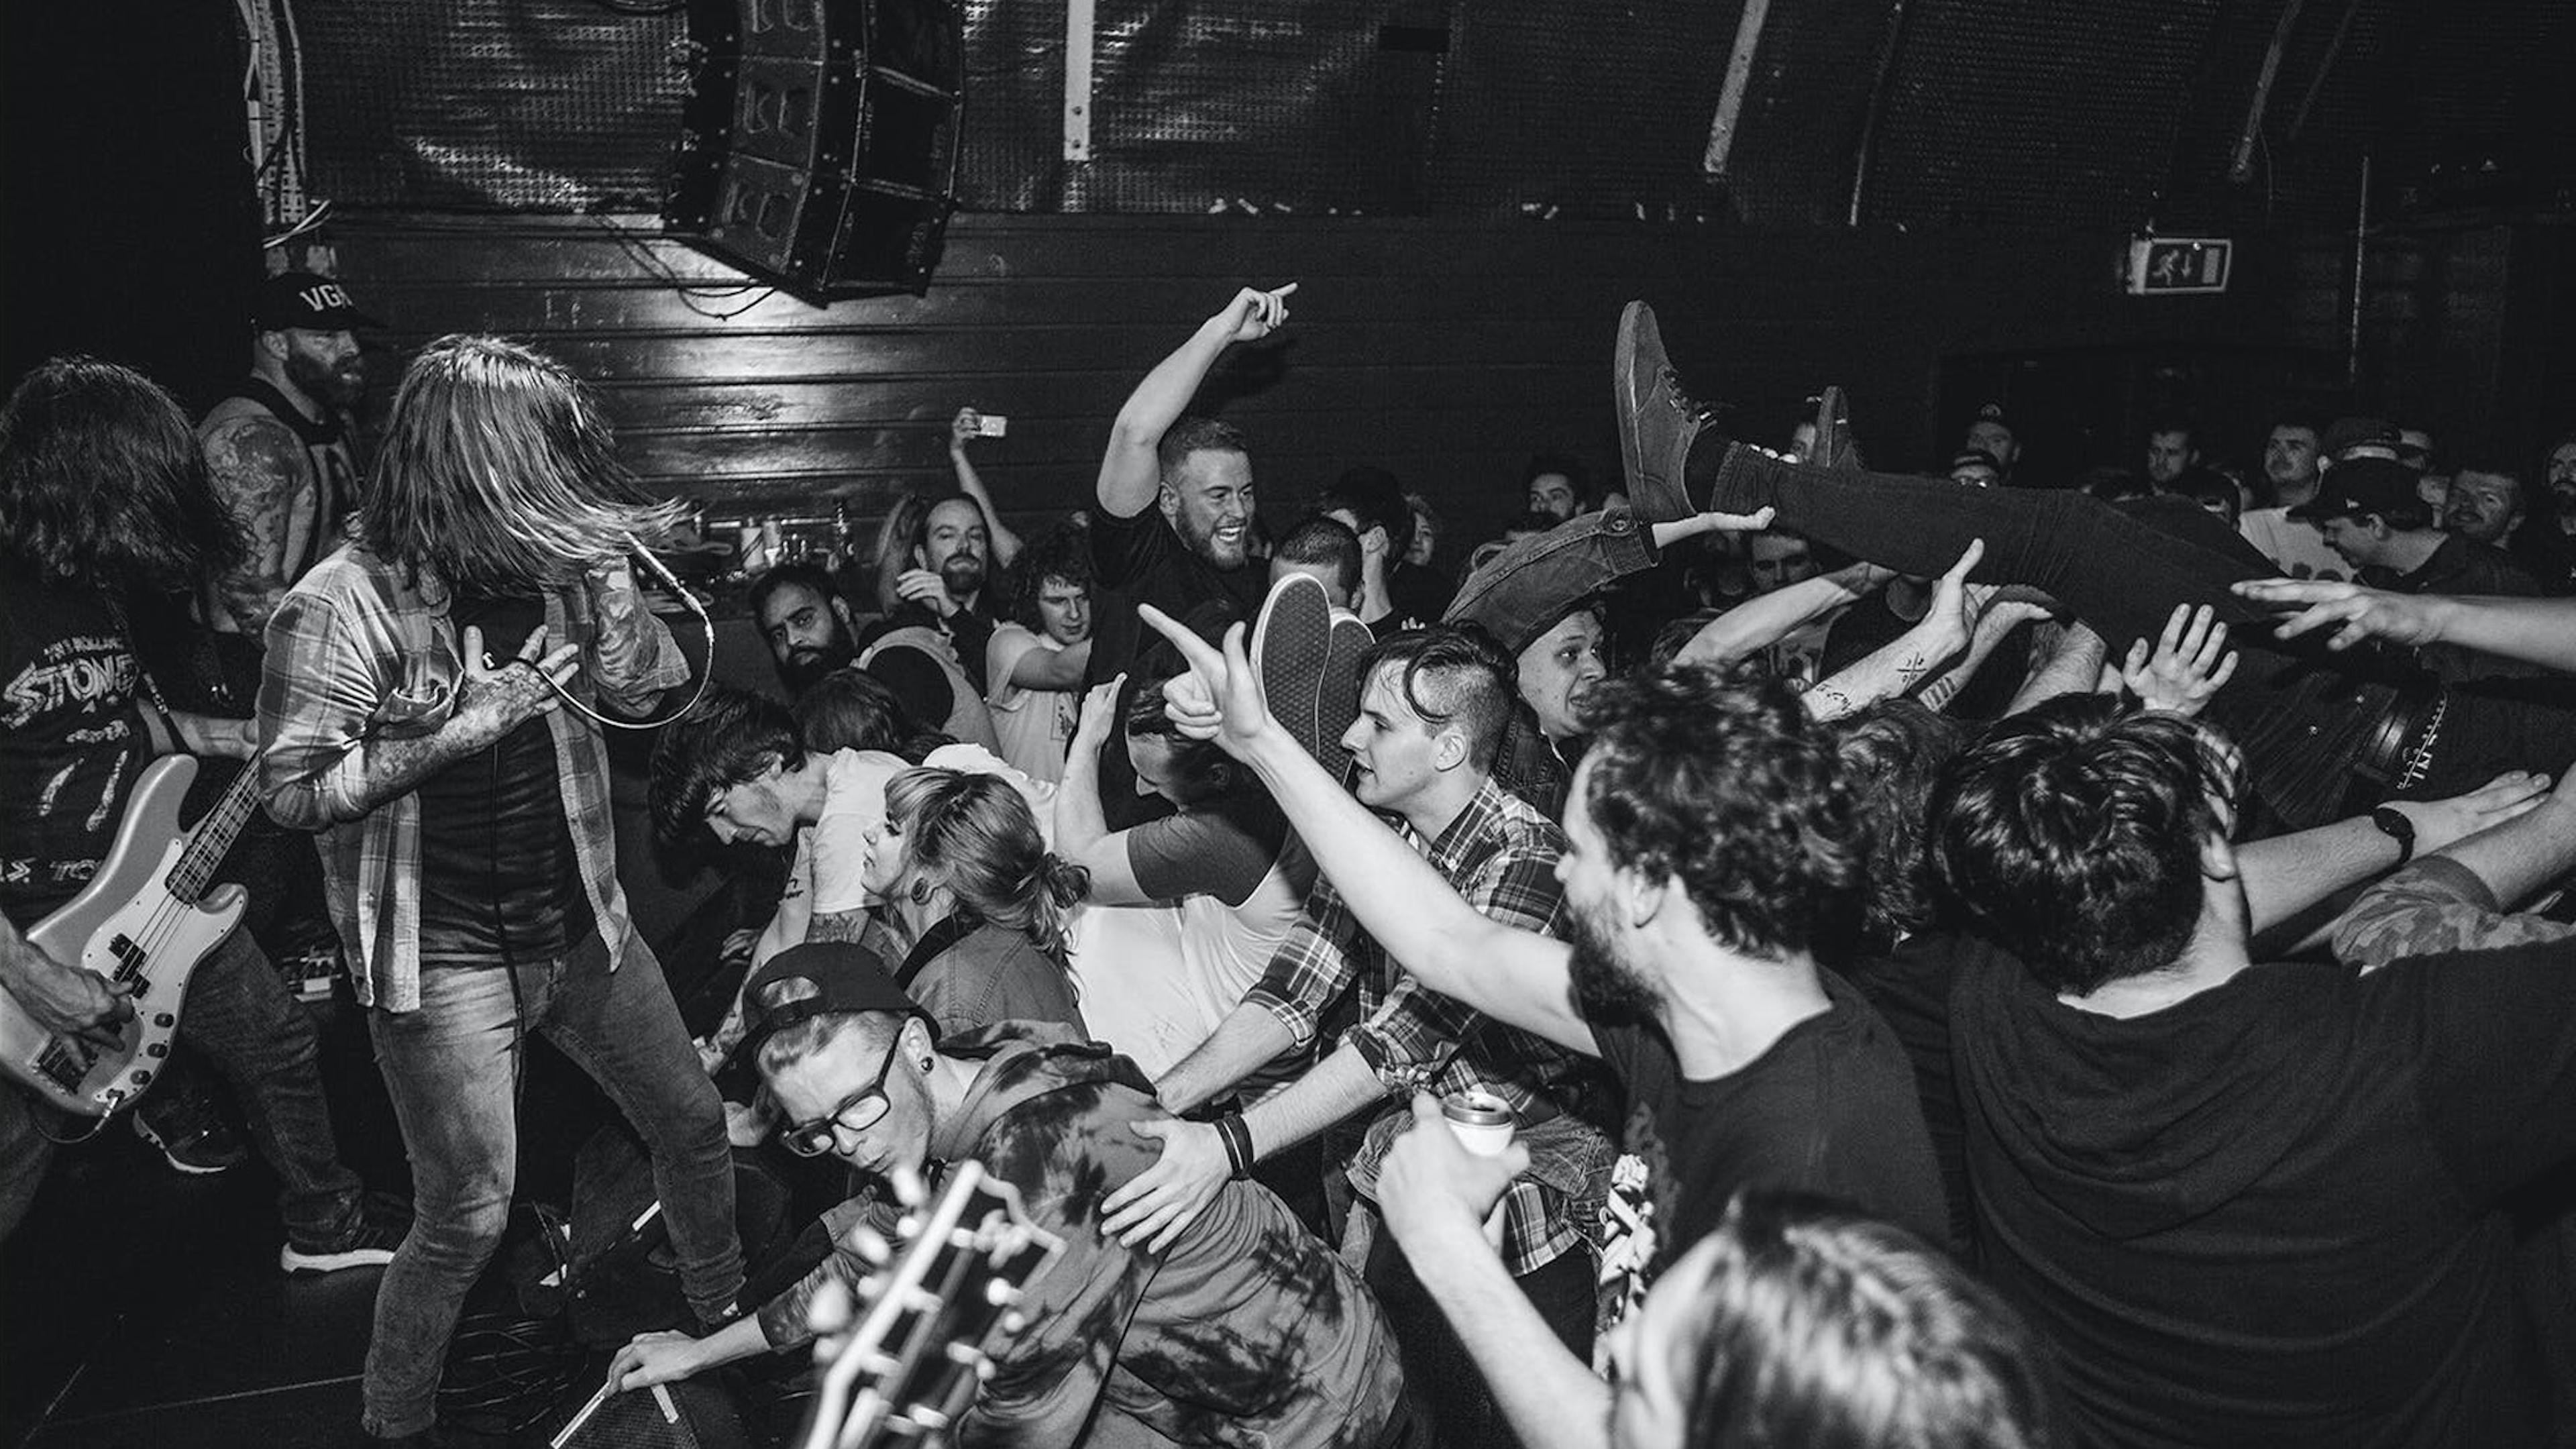 One year on: How grassroots venues have been keeping the scene alive